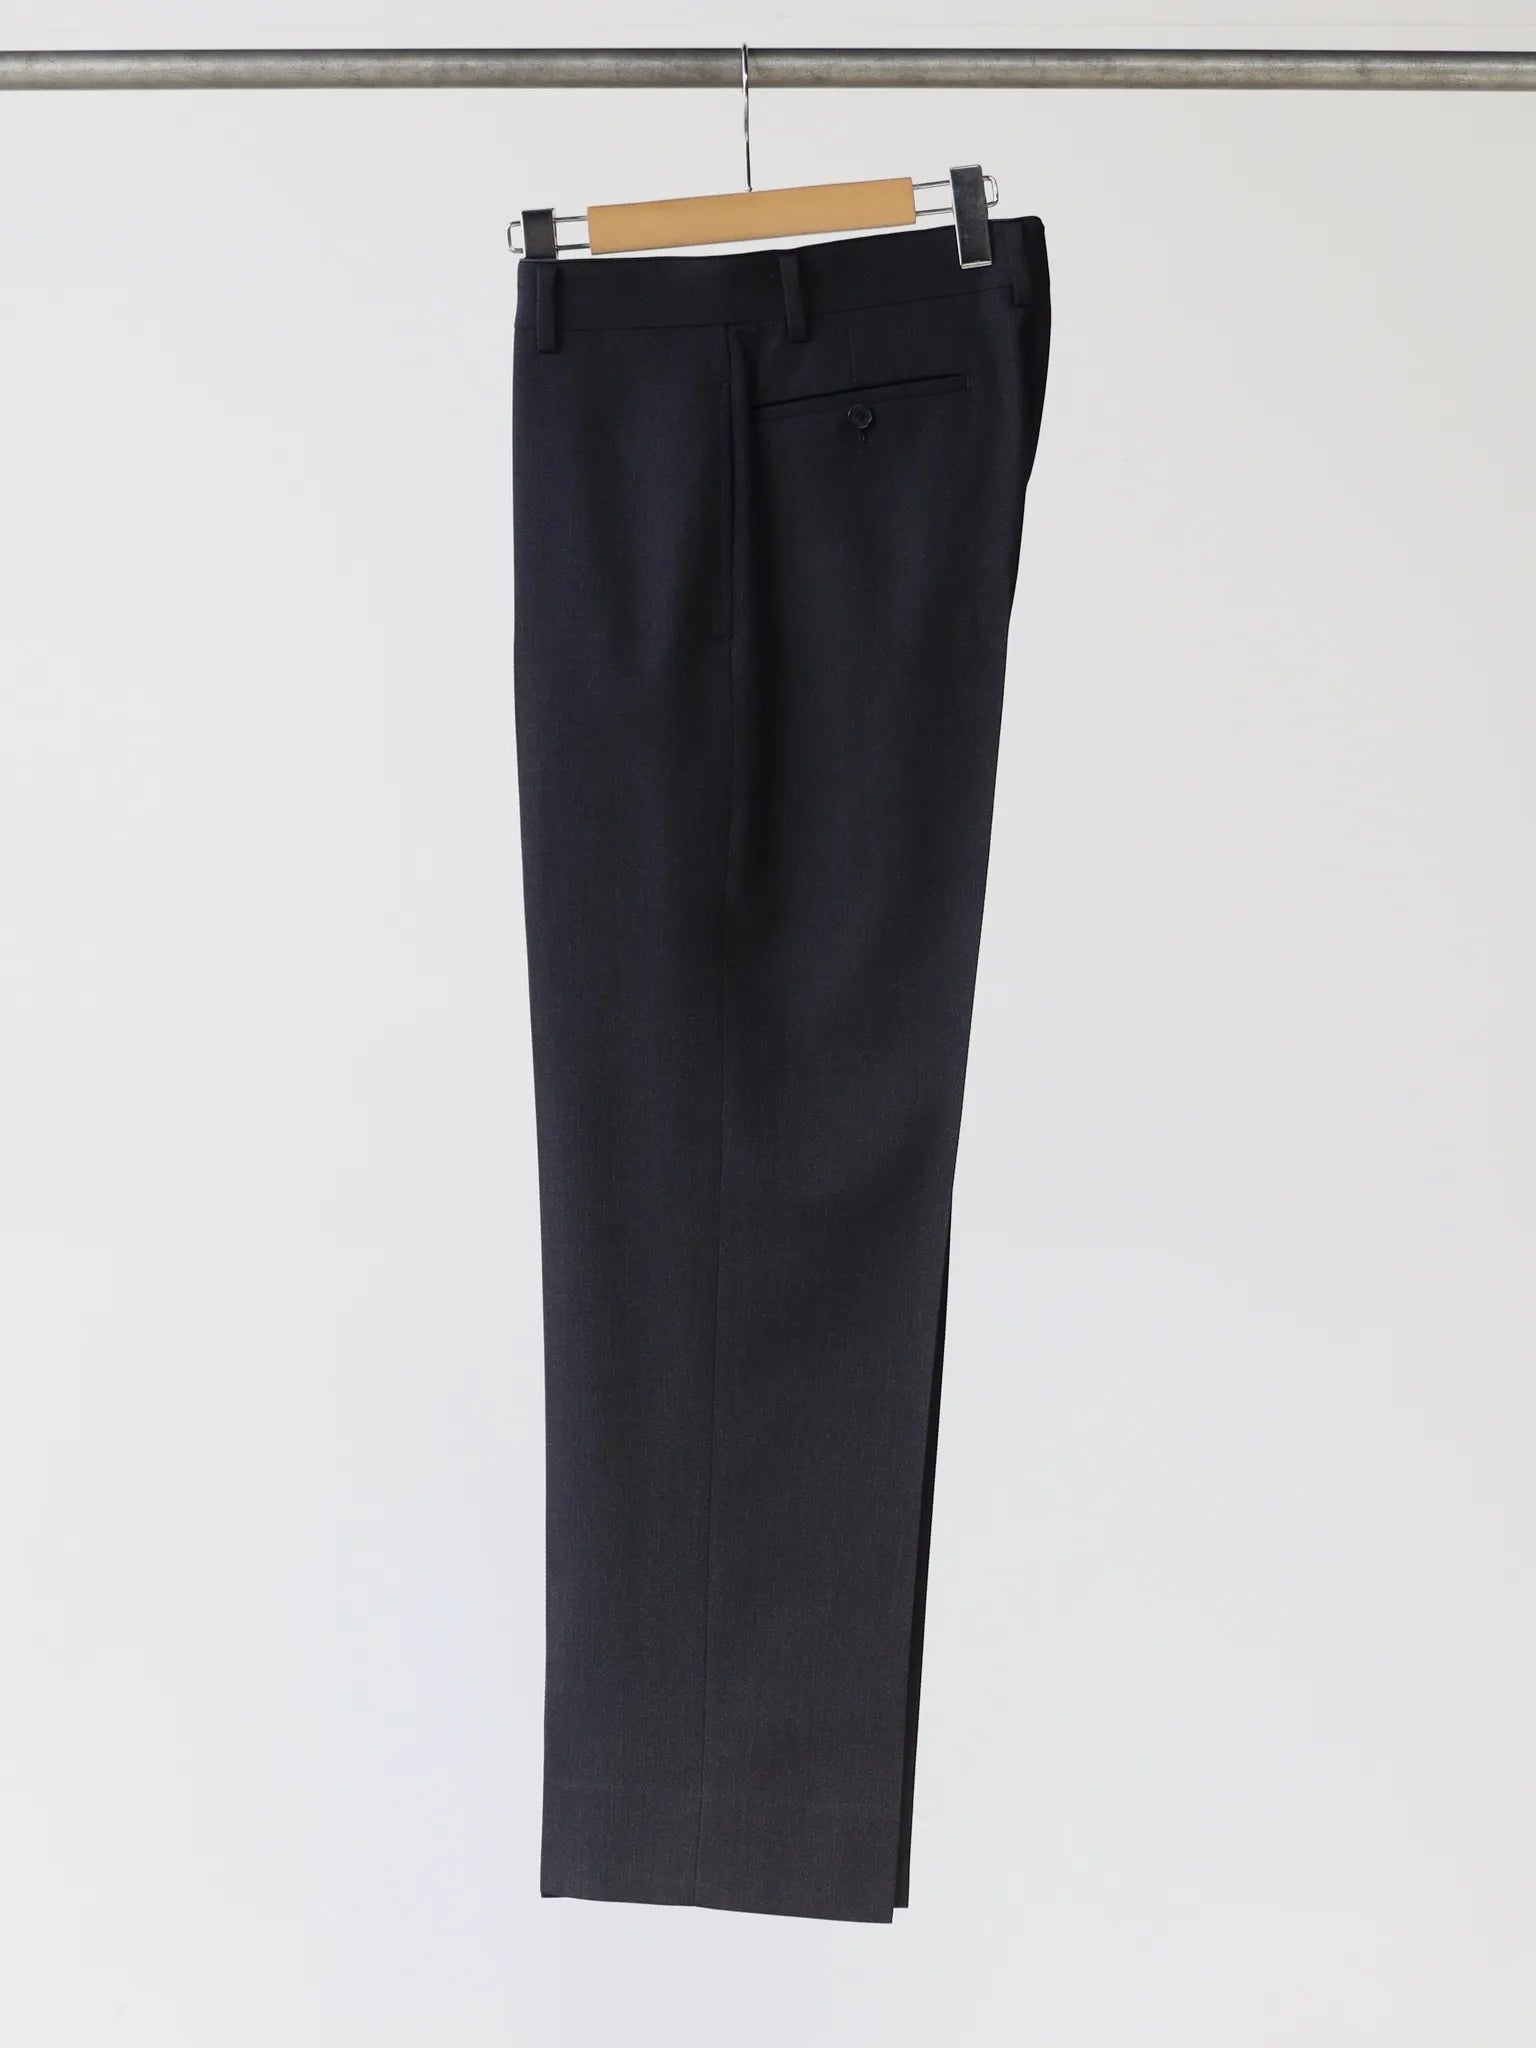 A.PRESSE Covert Cloth Trousers CHARCOAL | CASANOVA&CO (カサノヴァ 